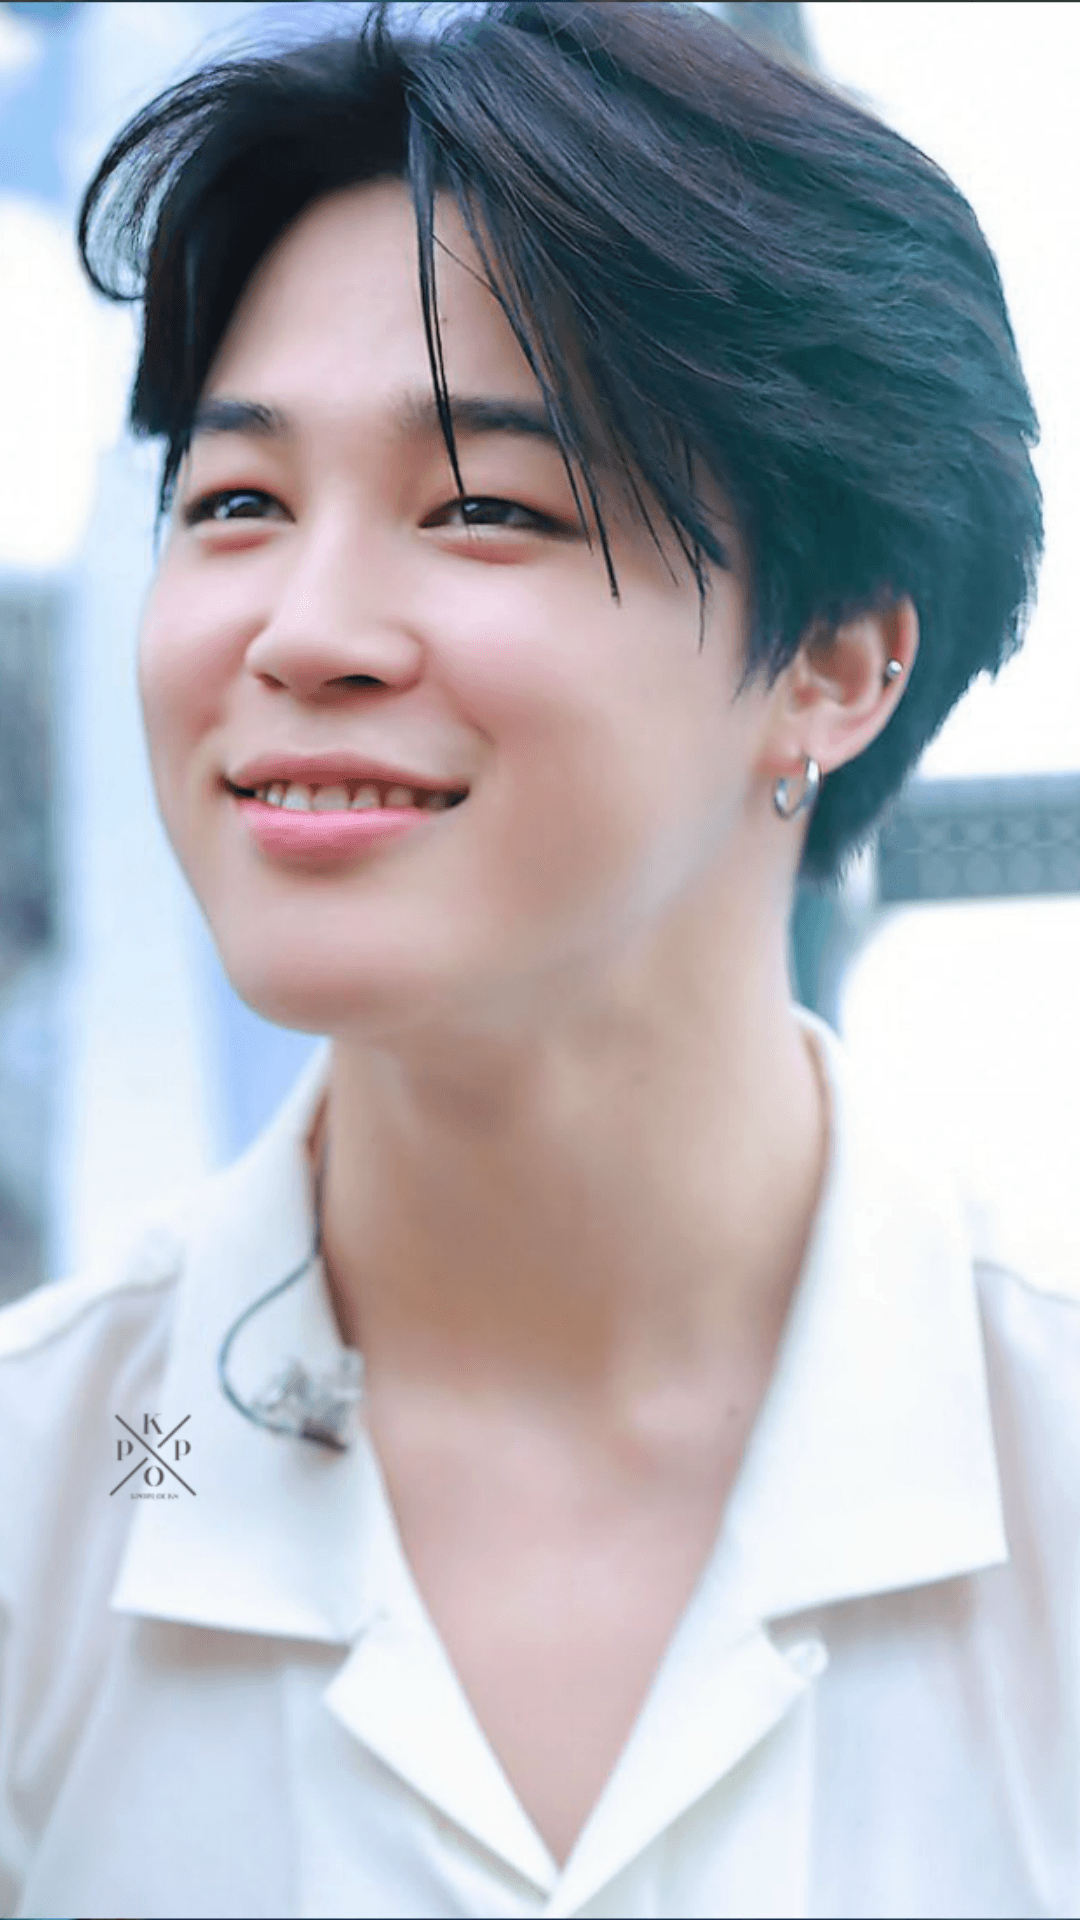 Jimin From BTS Wallpapers Top Free Jimin From BTS Backgrounds 